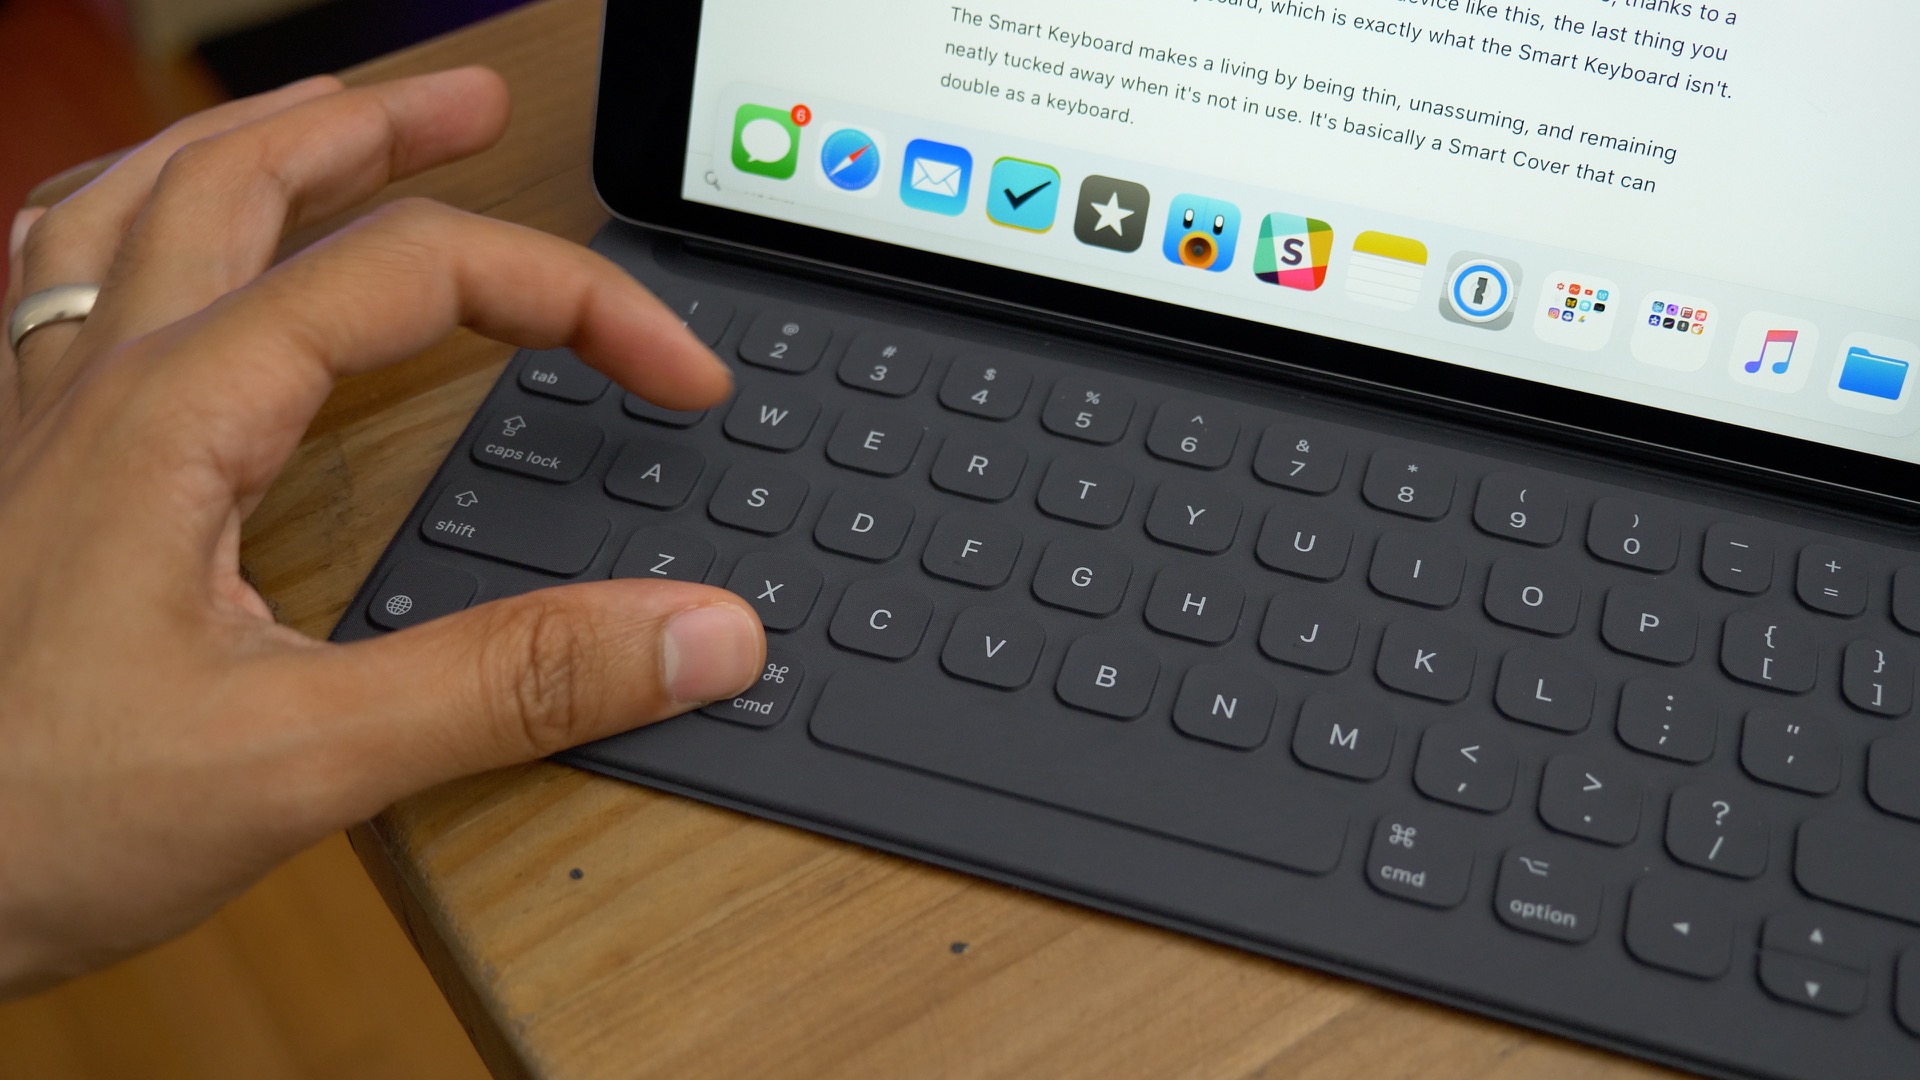 The Smart Keyboard makes the 10.5-inch iPad Pro a better device